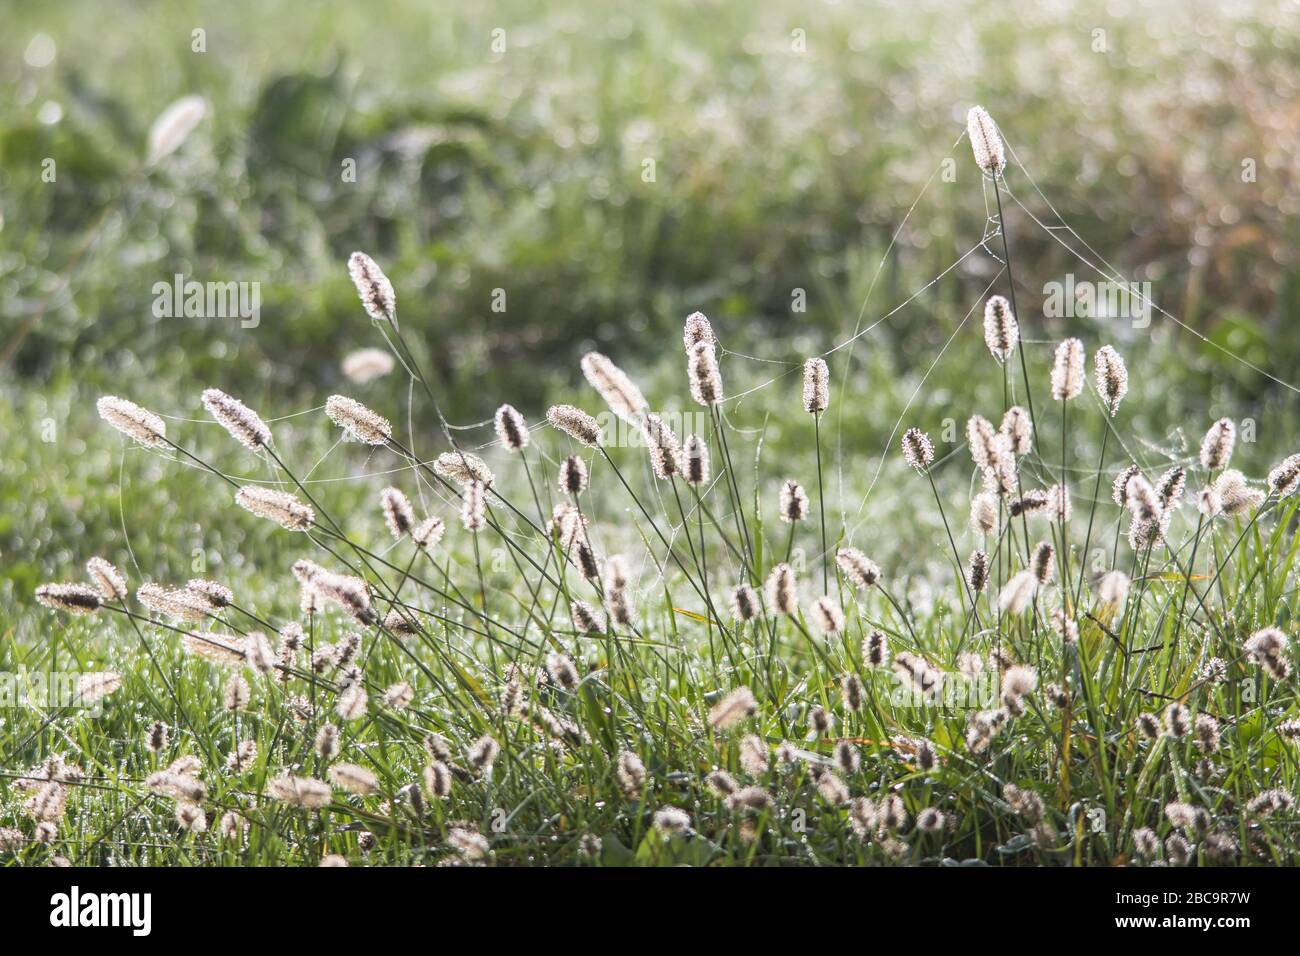 Field with Setaria pumila in the foreground with morning dew Stock Photo